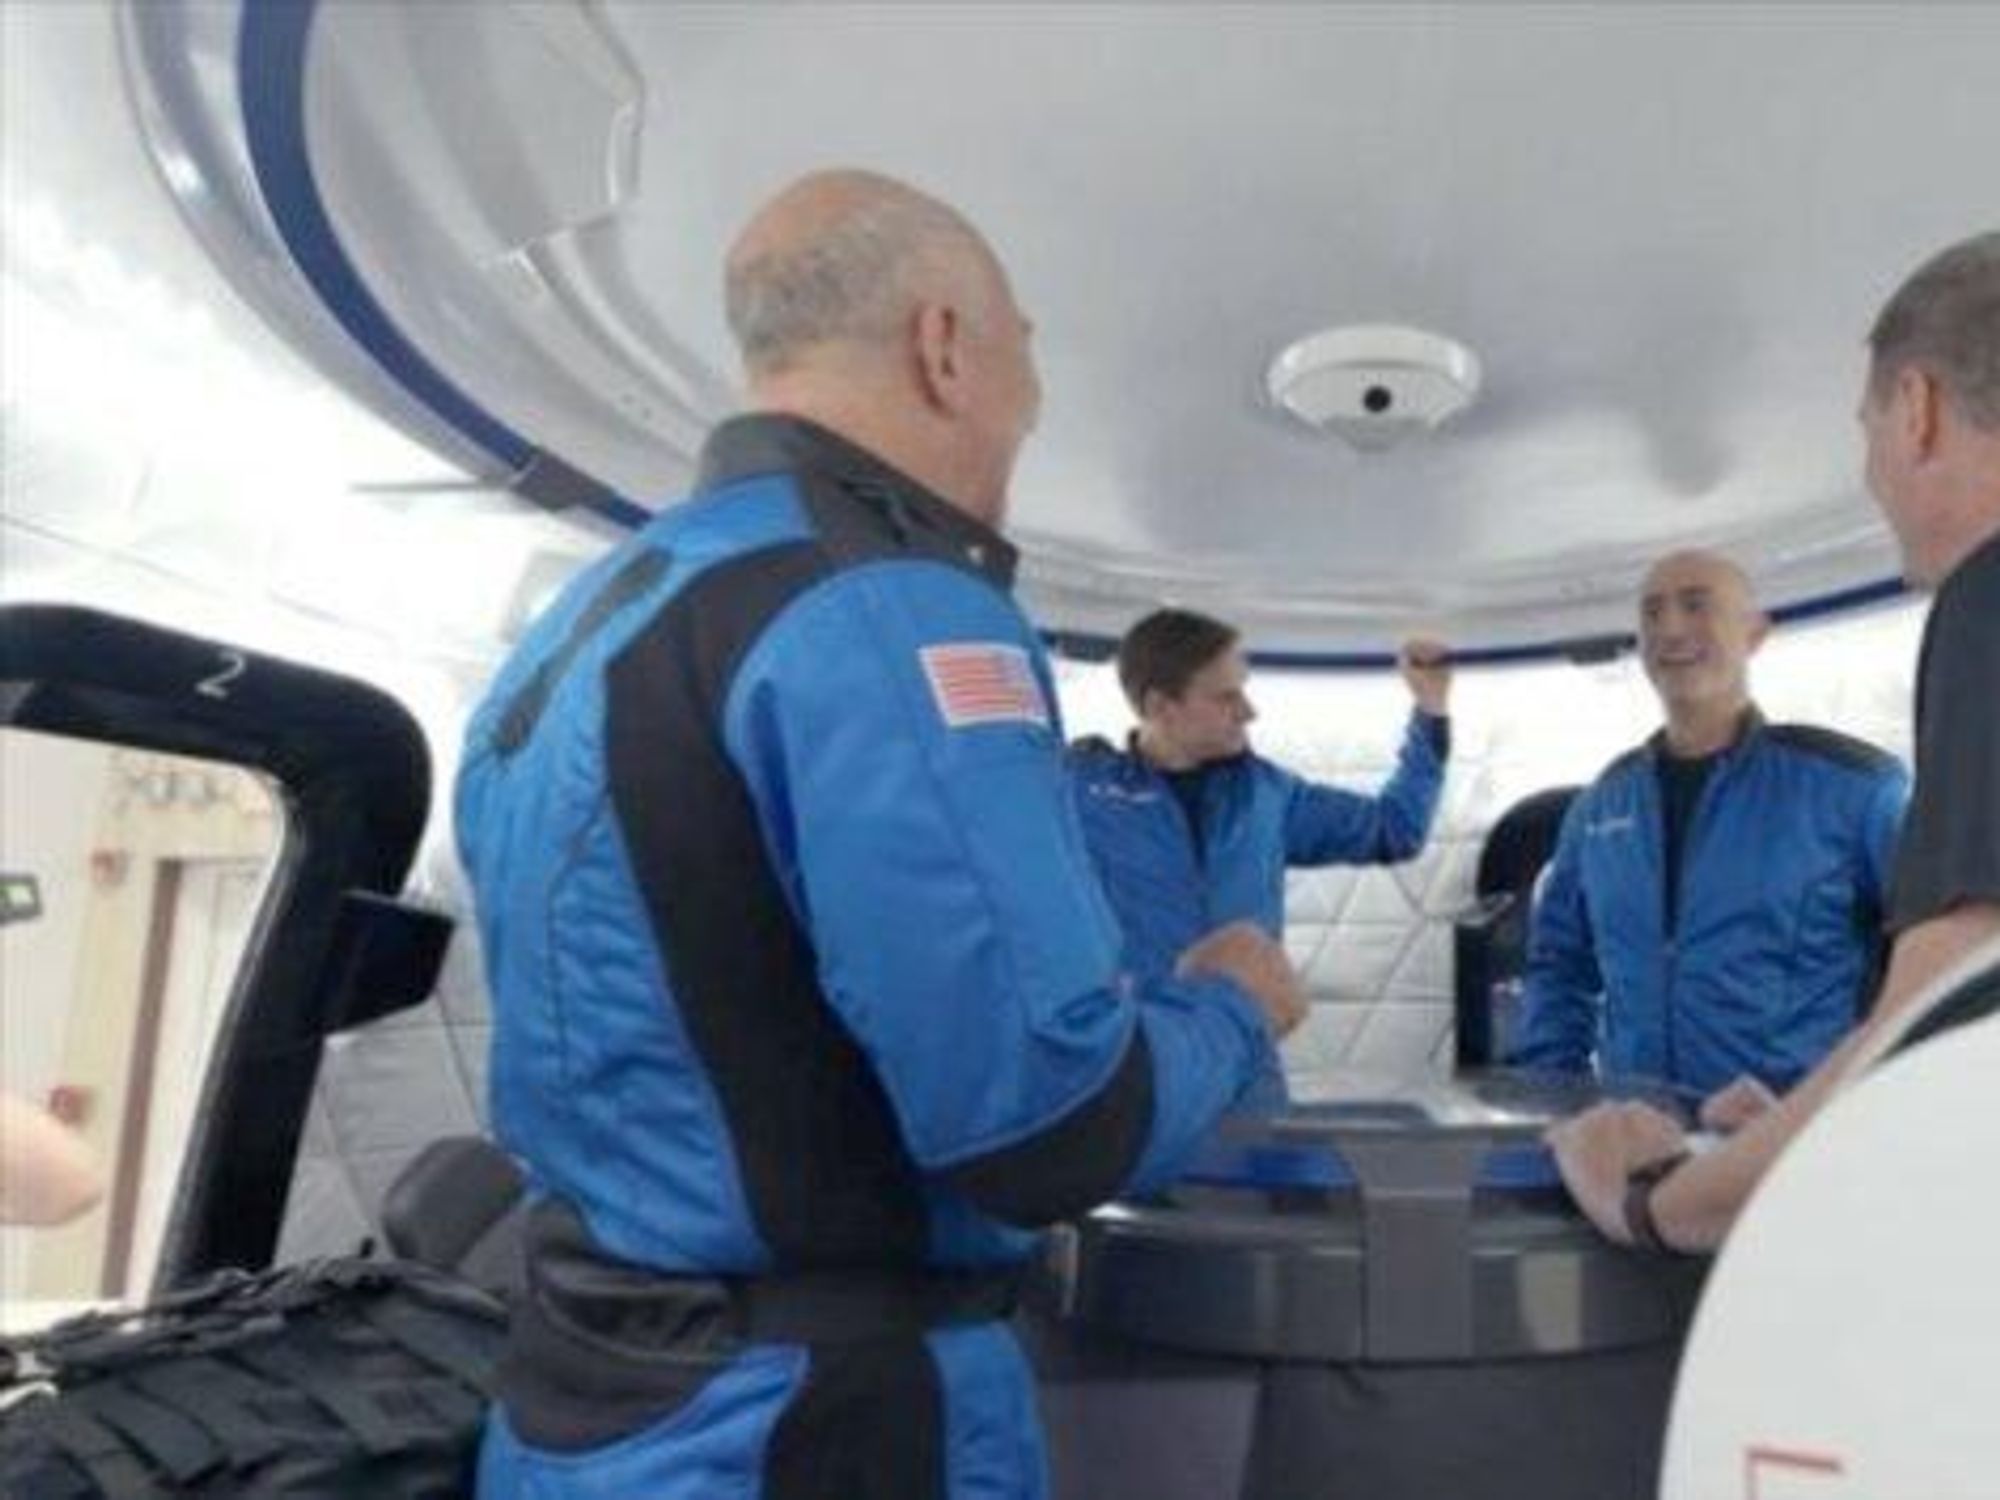 Jeff Bezos Says That He’s Excited, but Not Nervous, on the Eve of His Suborbital Spaceflight